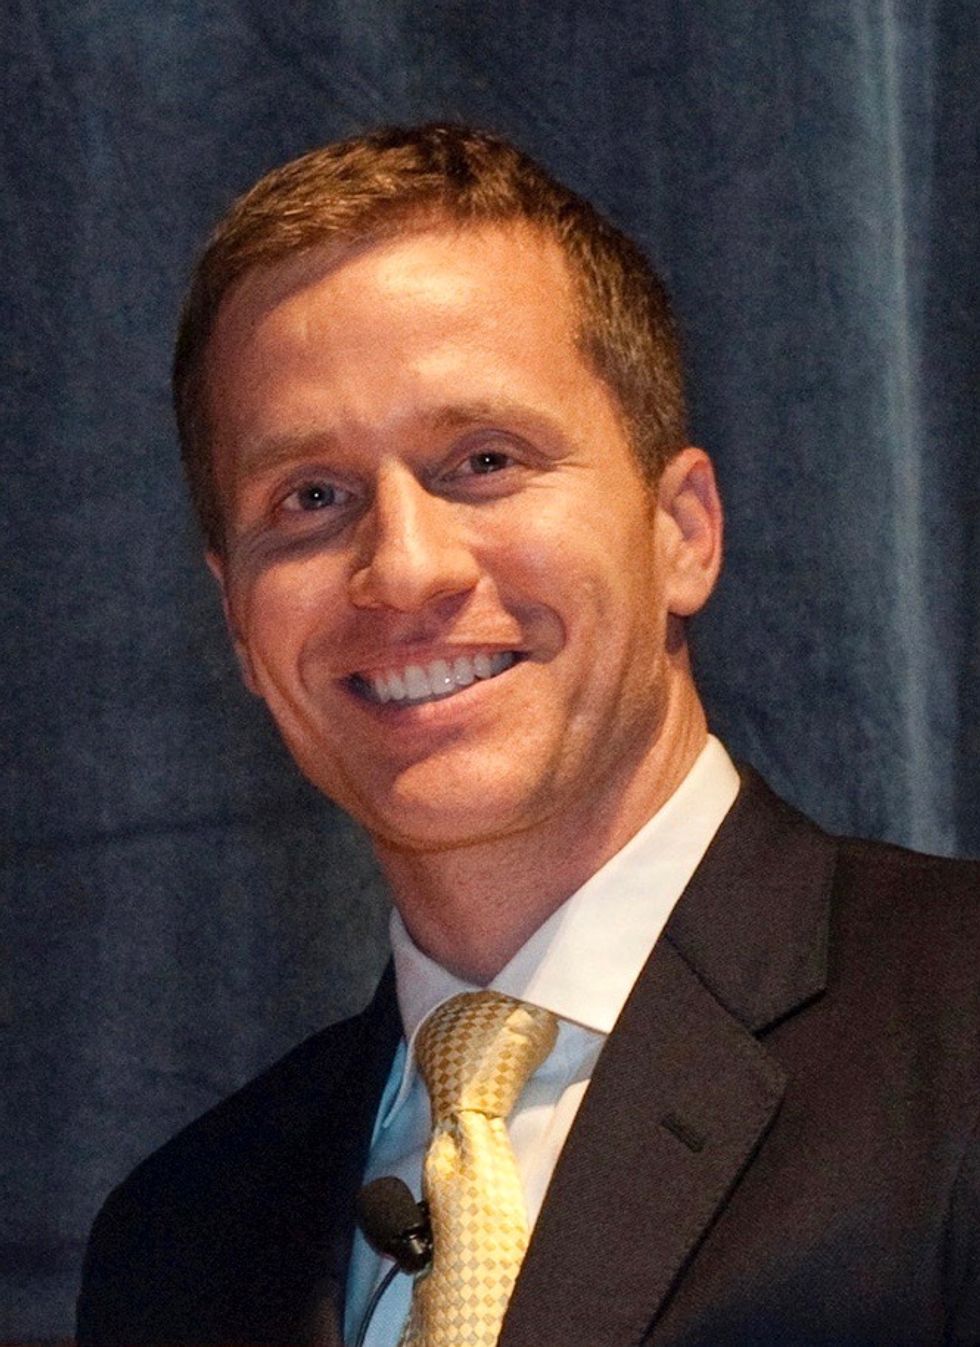 GOP Missouri Governor Eric Greitens Is A Blackmailing Adulterous Piece Of Shit, ALLEGEDLY